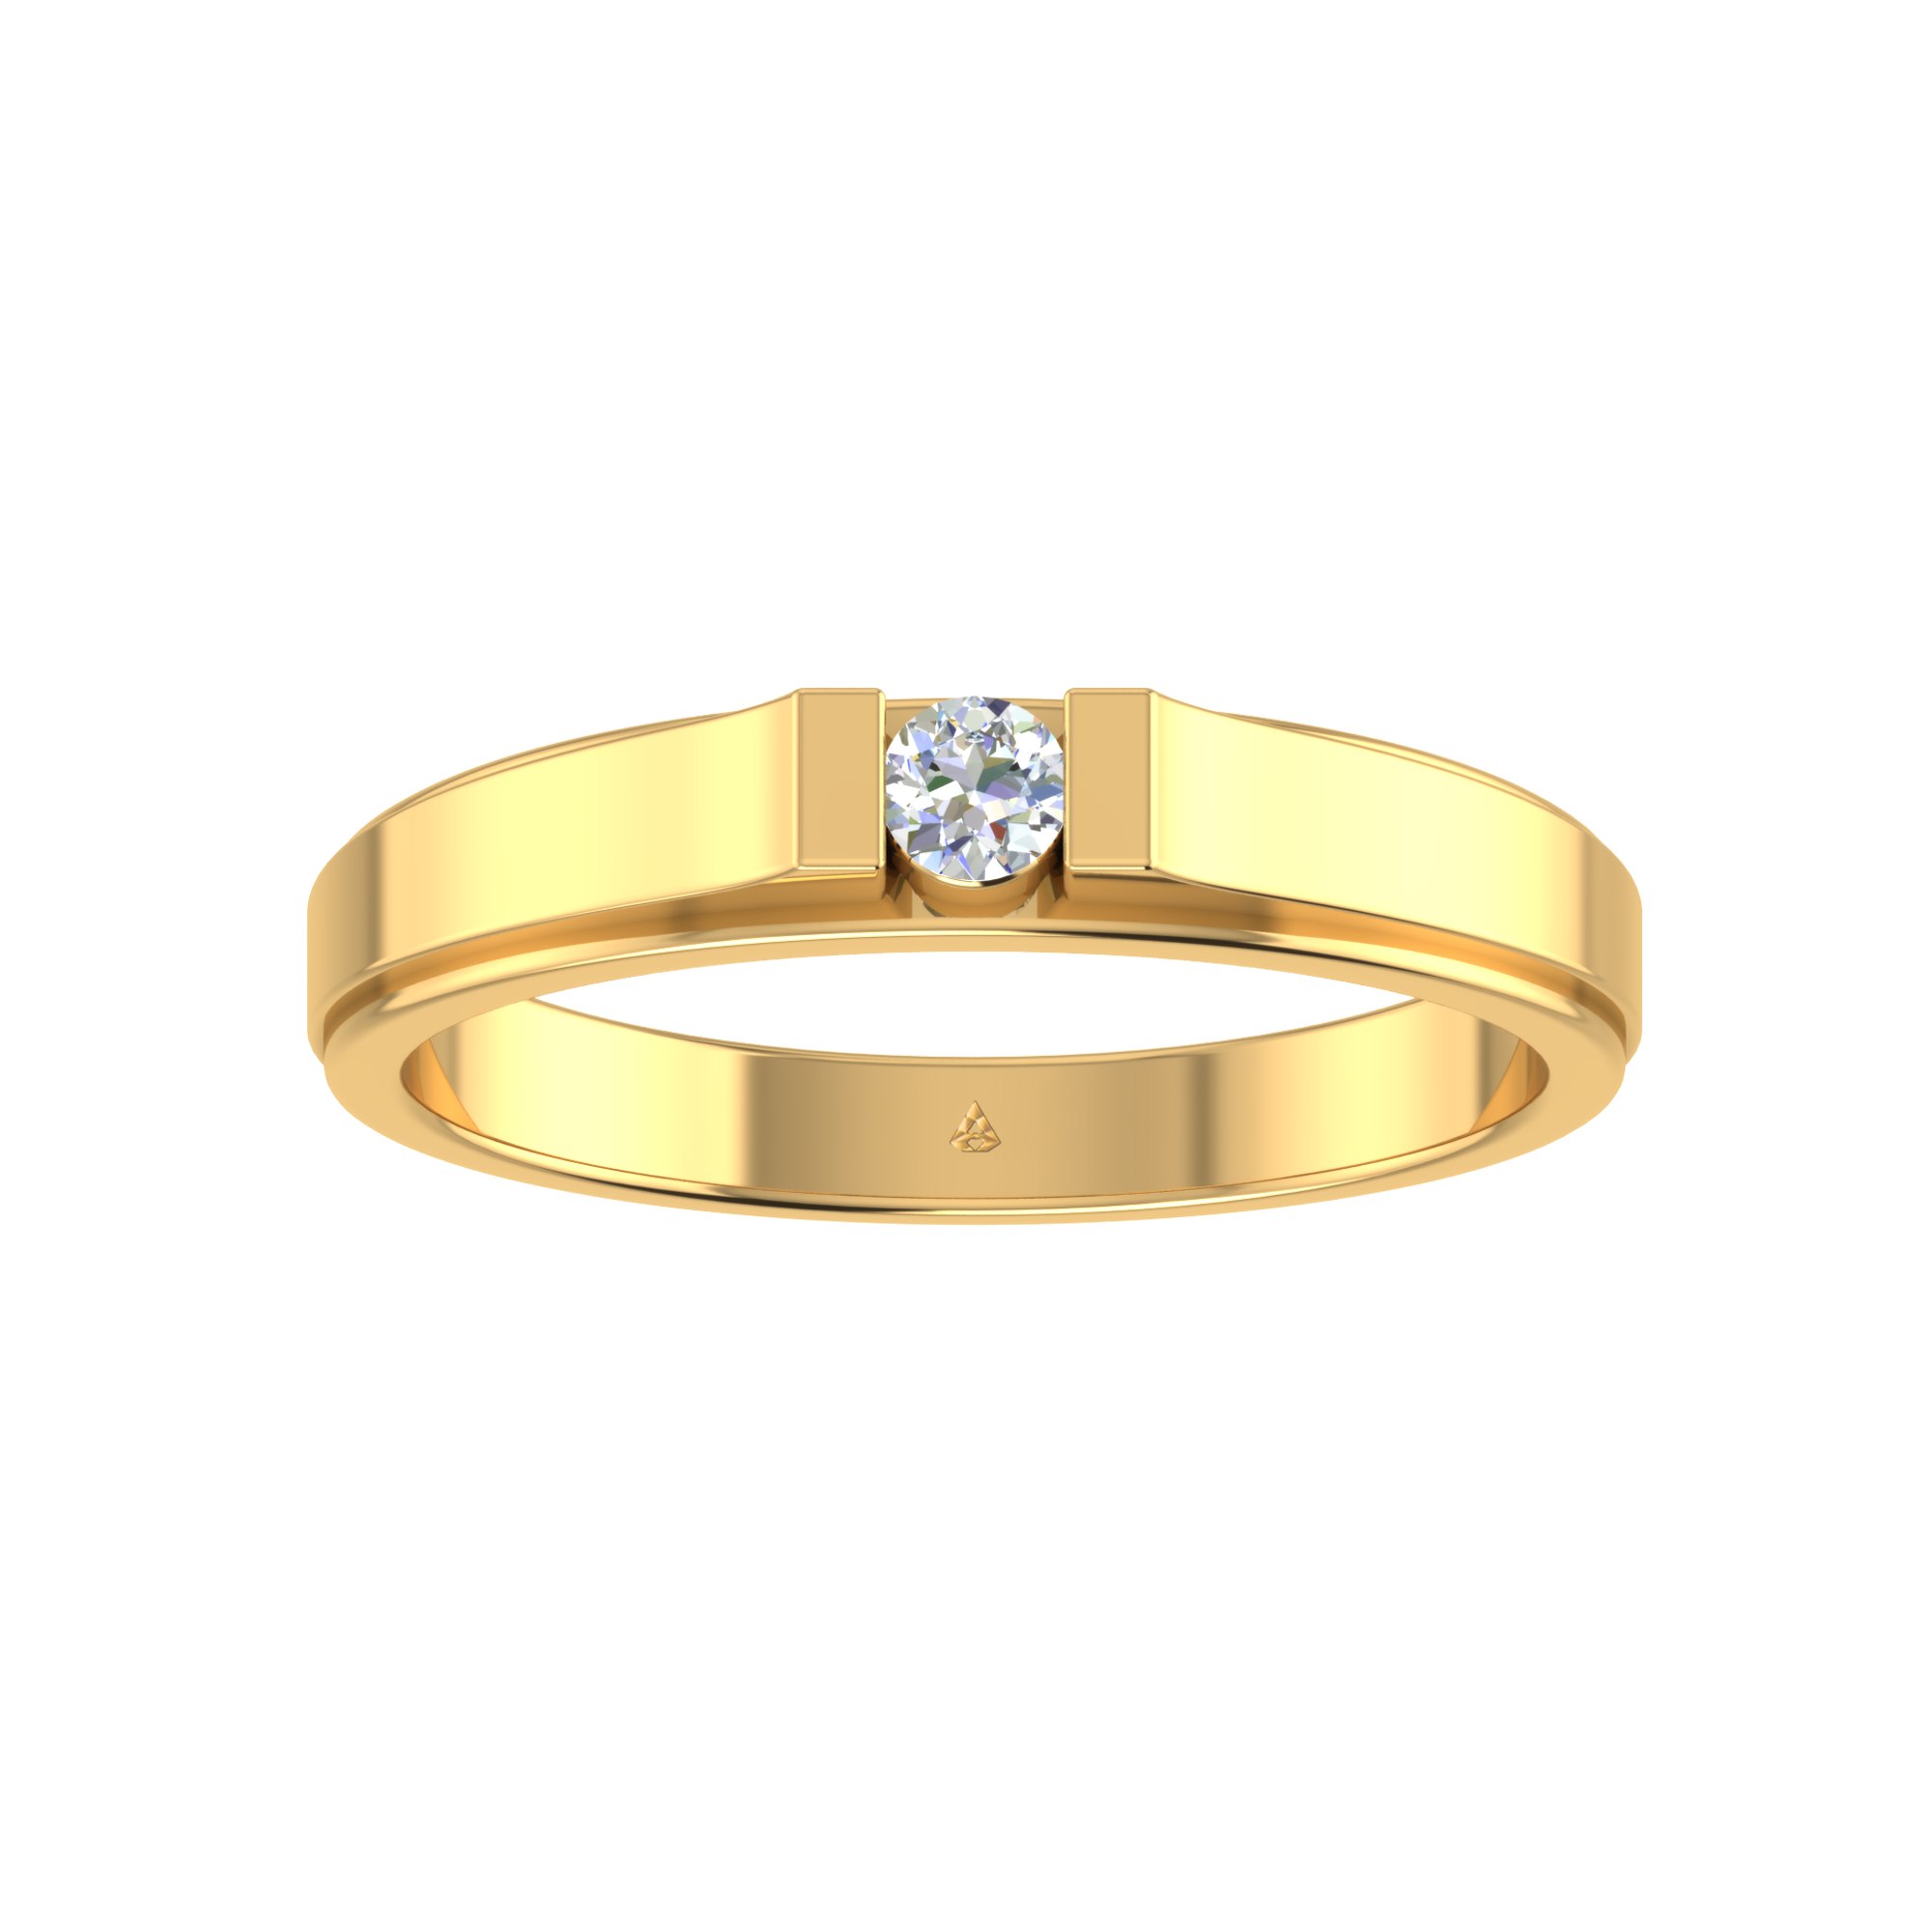 1 Gram Gold Plated Om With Diamond Finely Detailed Design Ring For Men -  Style B318 at Rs 2650.00 | Gold Plated Rings | ID: 2851111619848